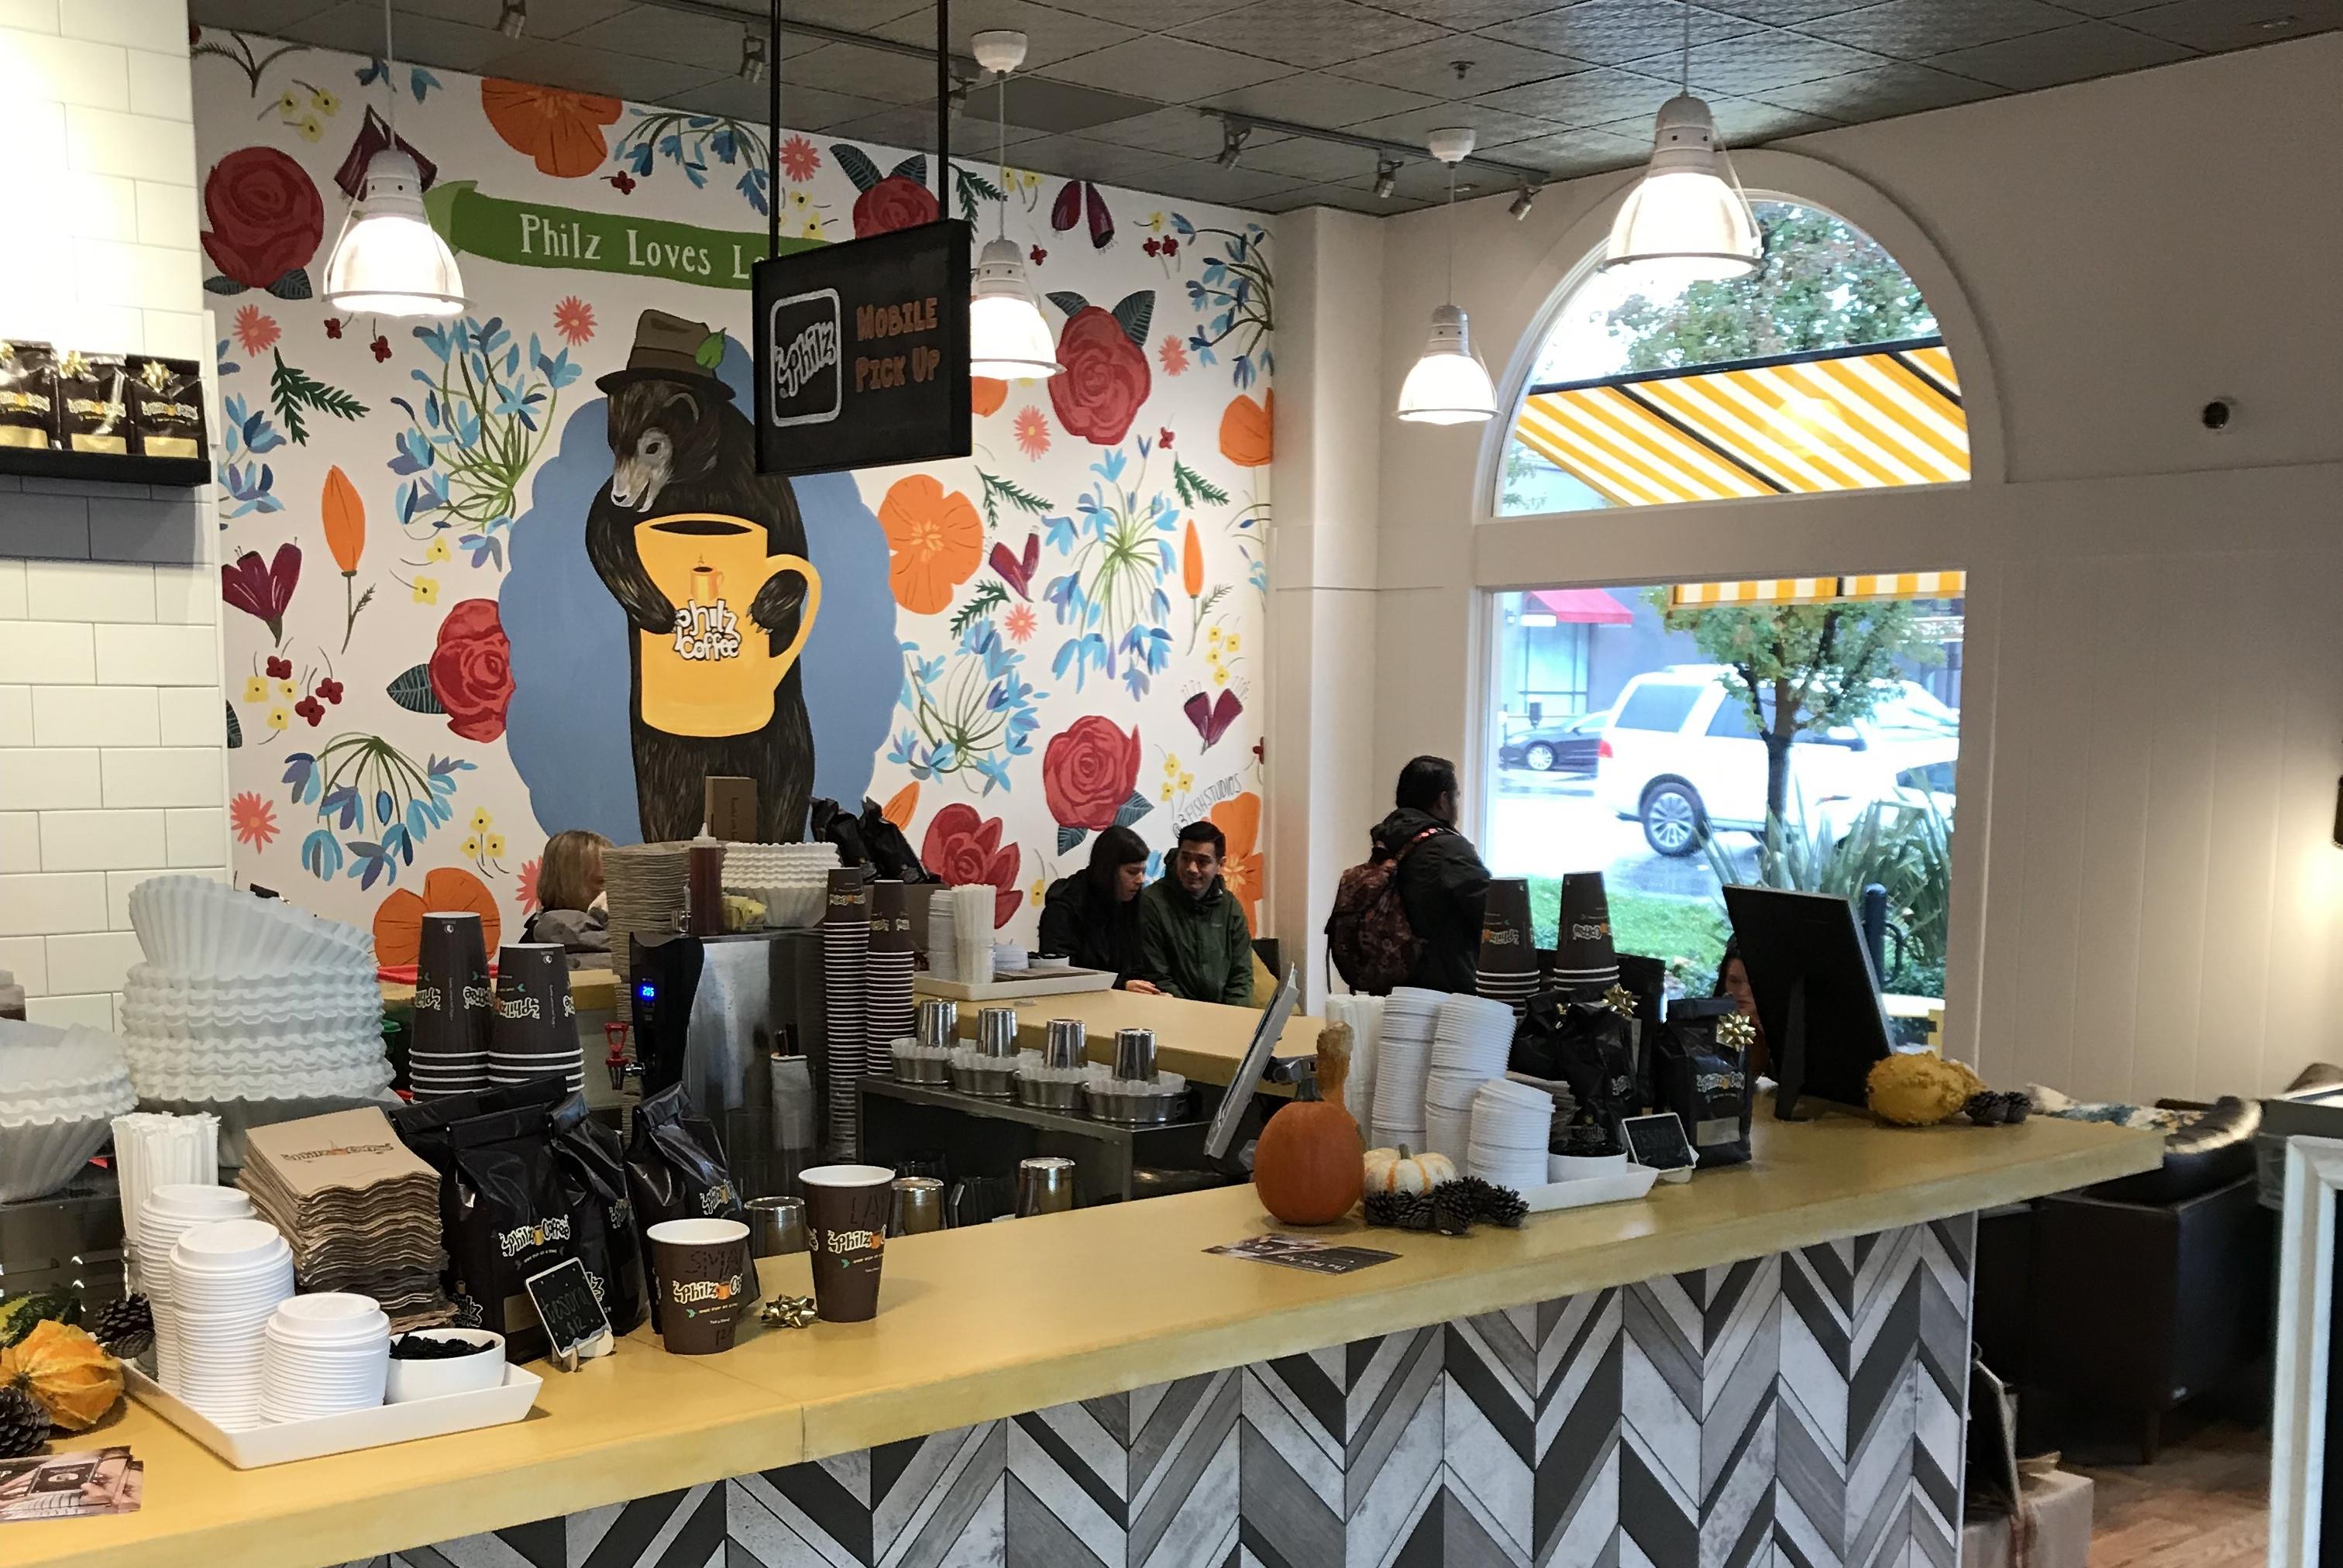 Philz recently opened a store in Lafayette, California, that features bright colors, patterns, and textures to match the vibrancy of the local community.